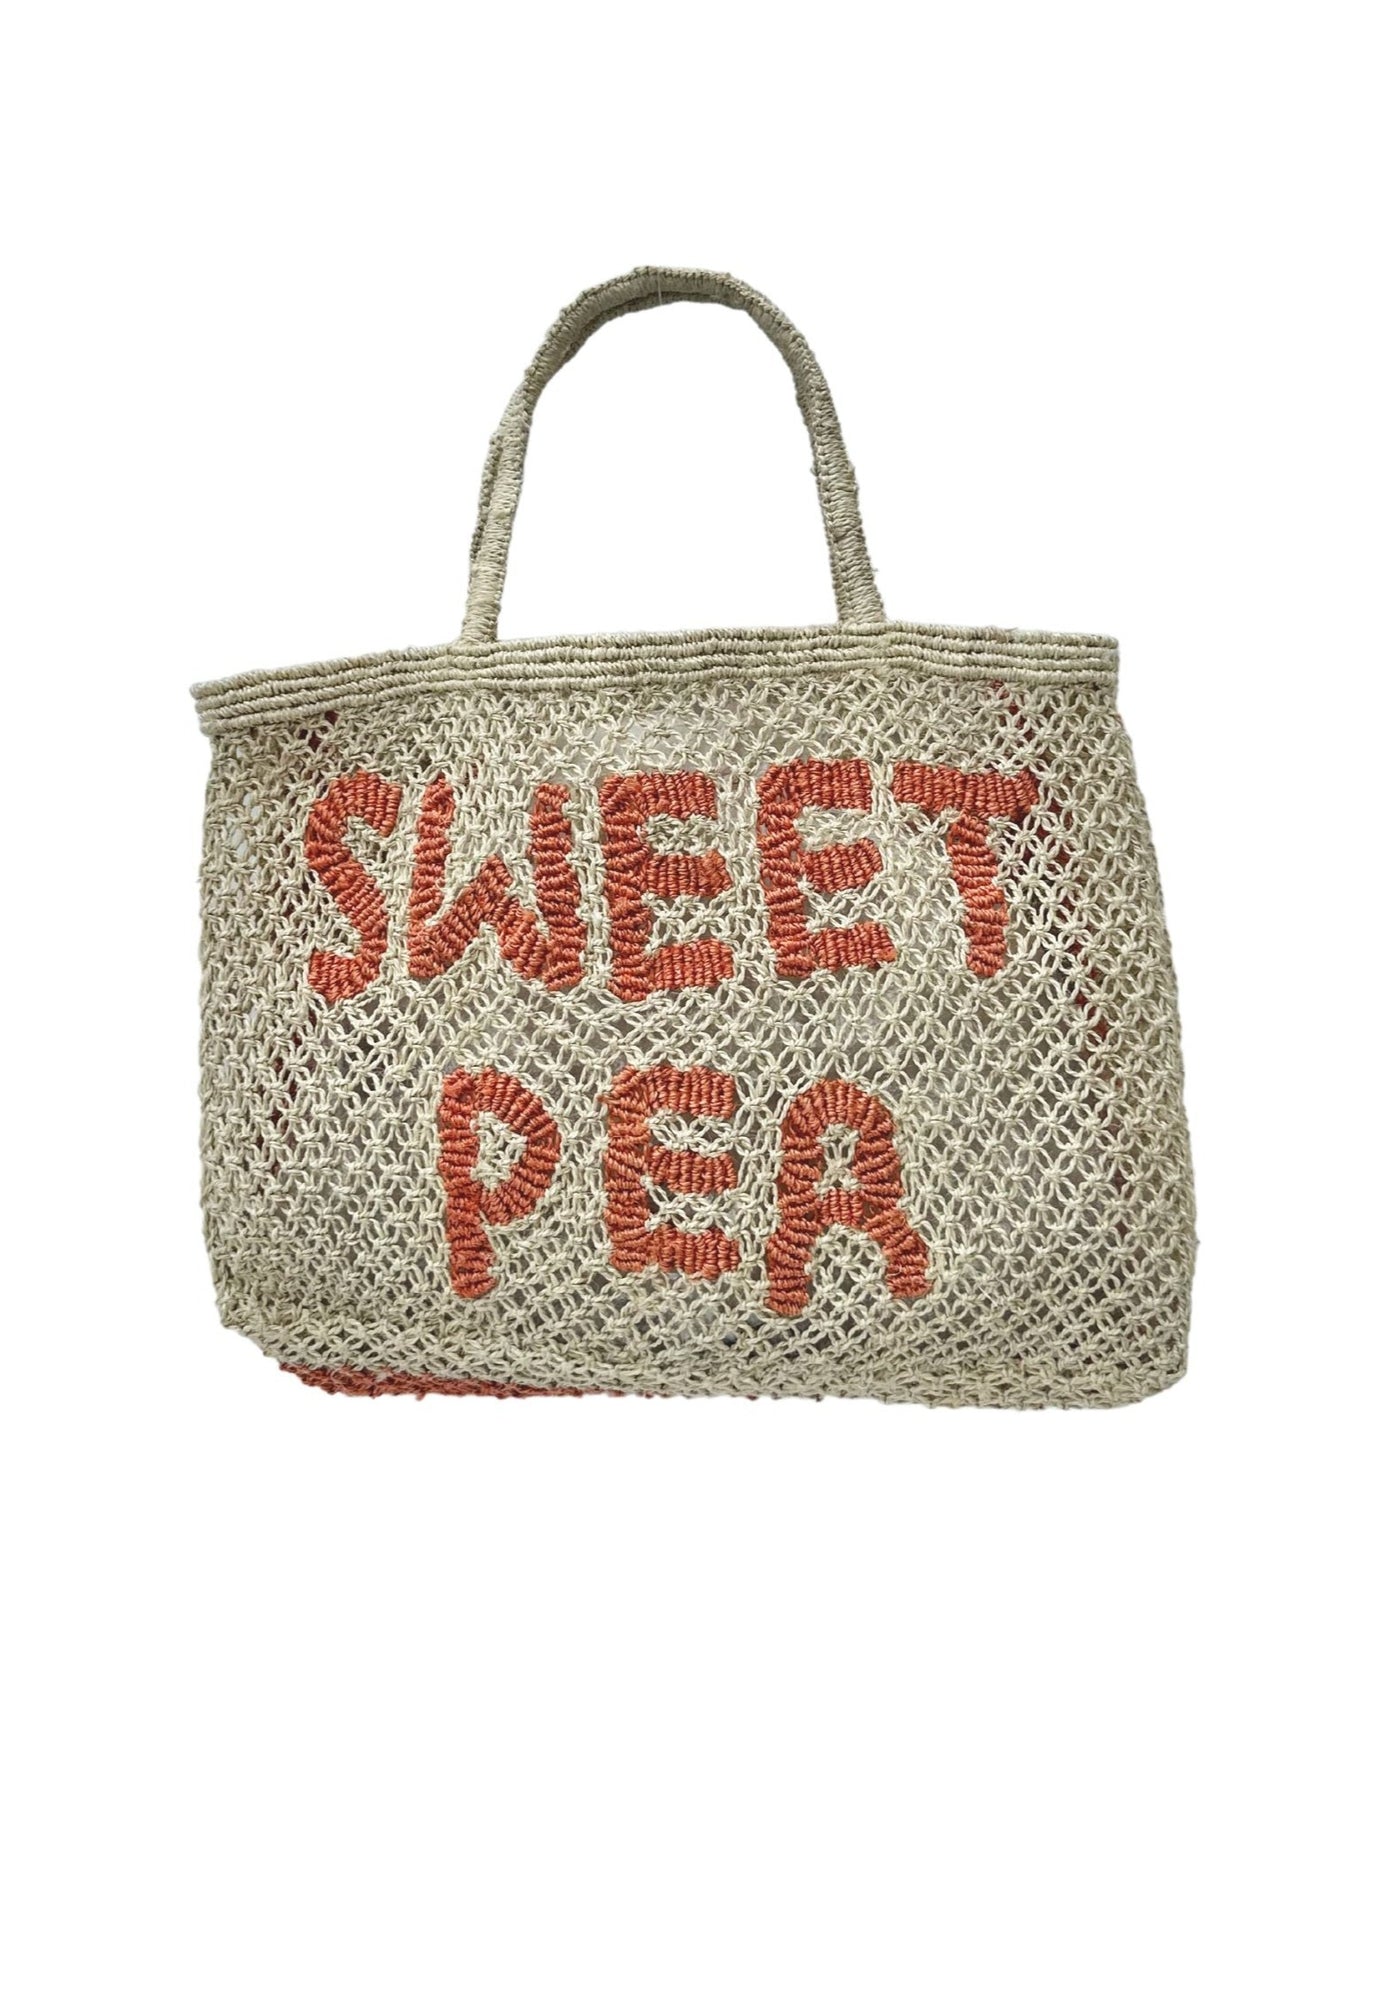 Sweet Pea - Natural and peach